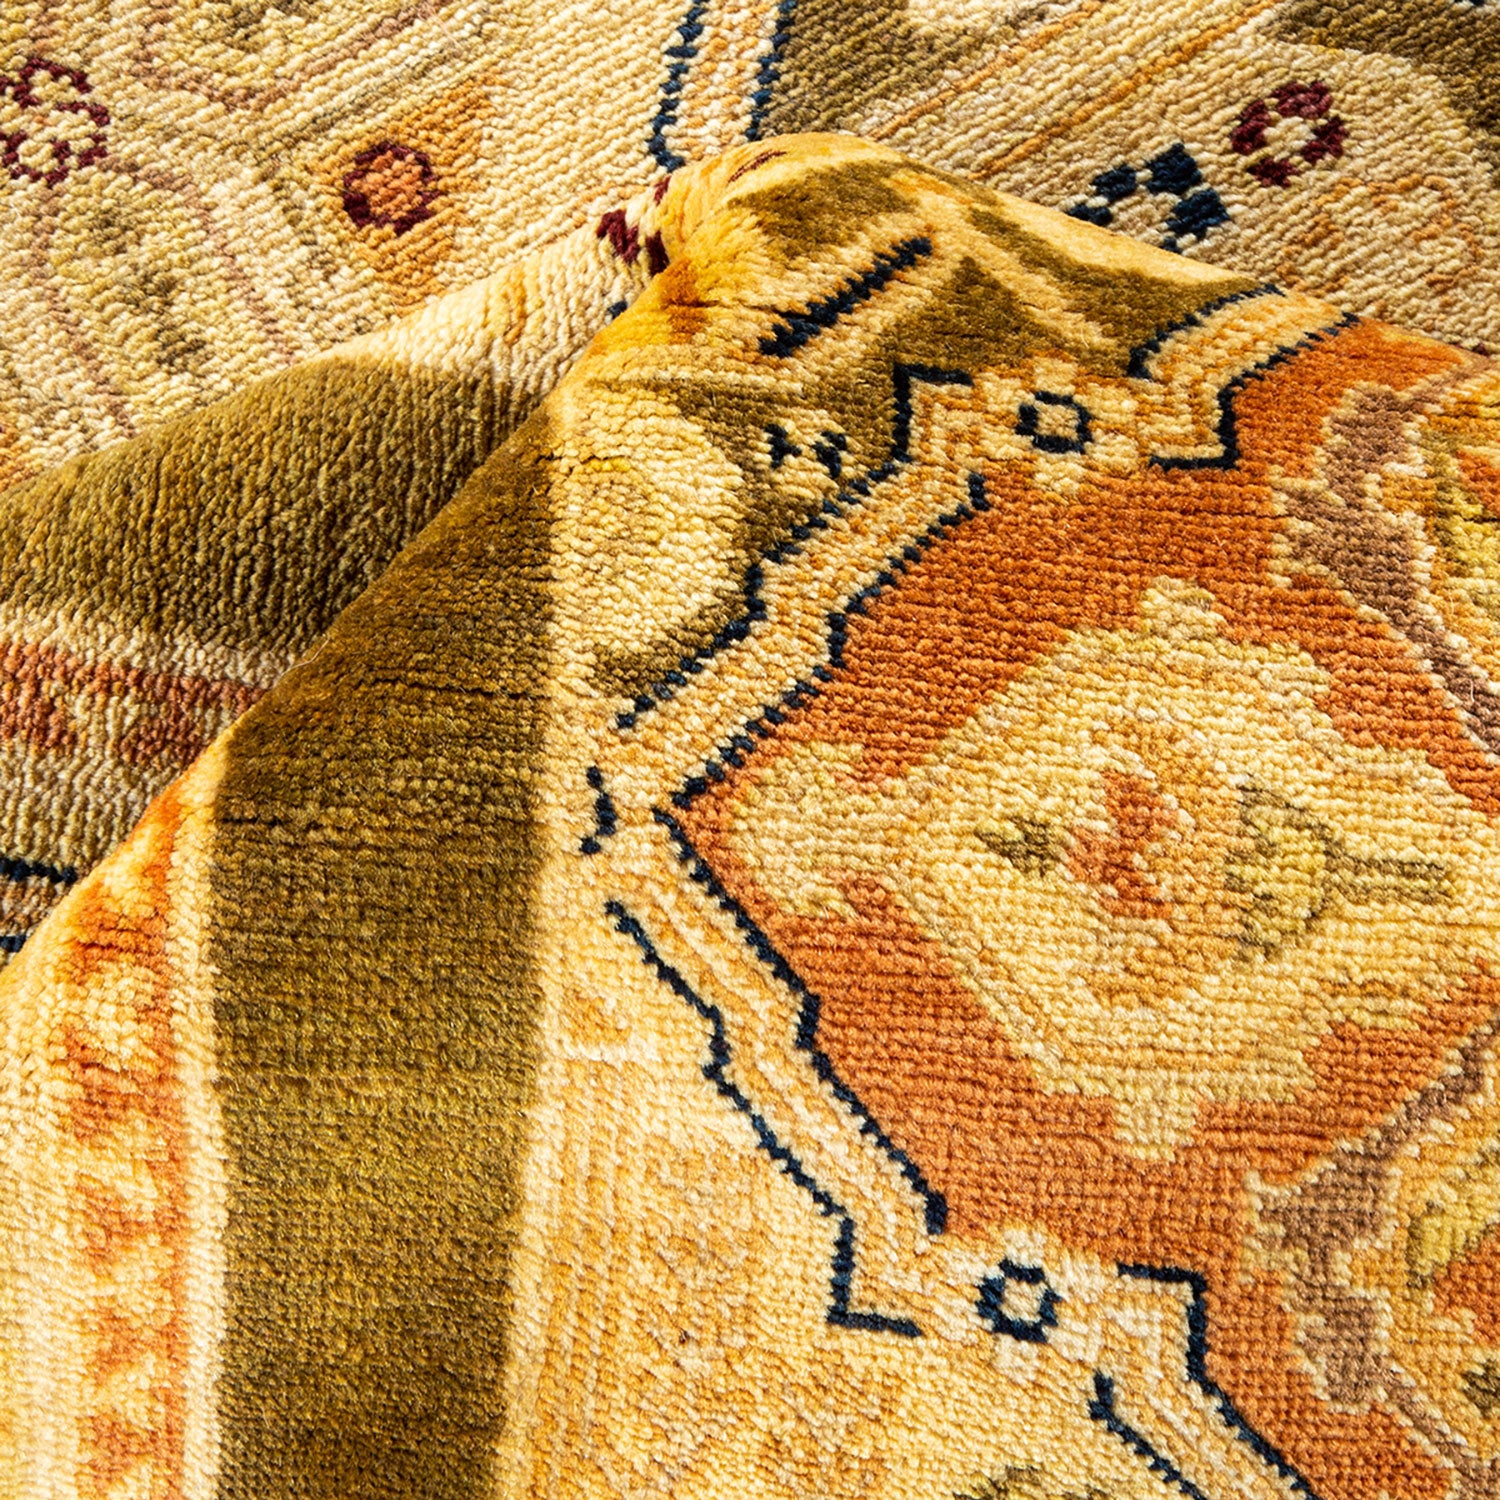 Close-up of a plush, multicolored woven rug with intricate patterns.